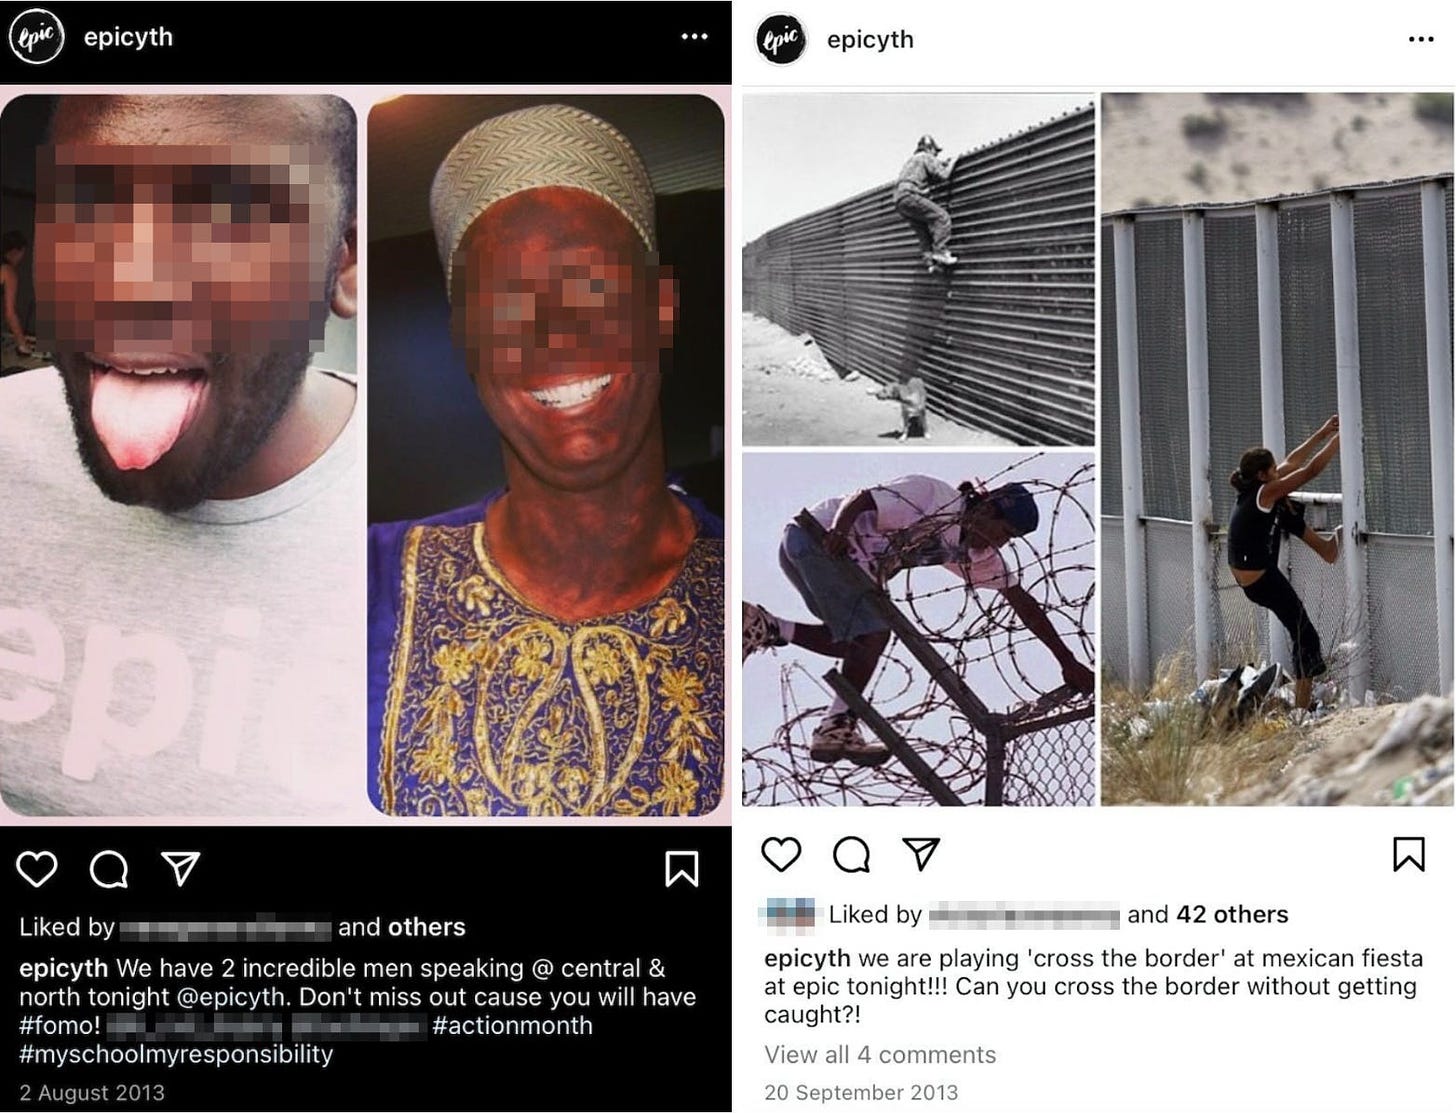 A 2013 Social Media post from Life church featuring a leader in black face, and an ad for a mexican boarder crossing night, showing people trying to cross into America over the border wall